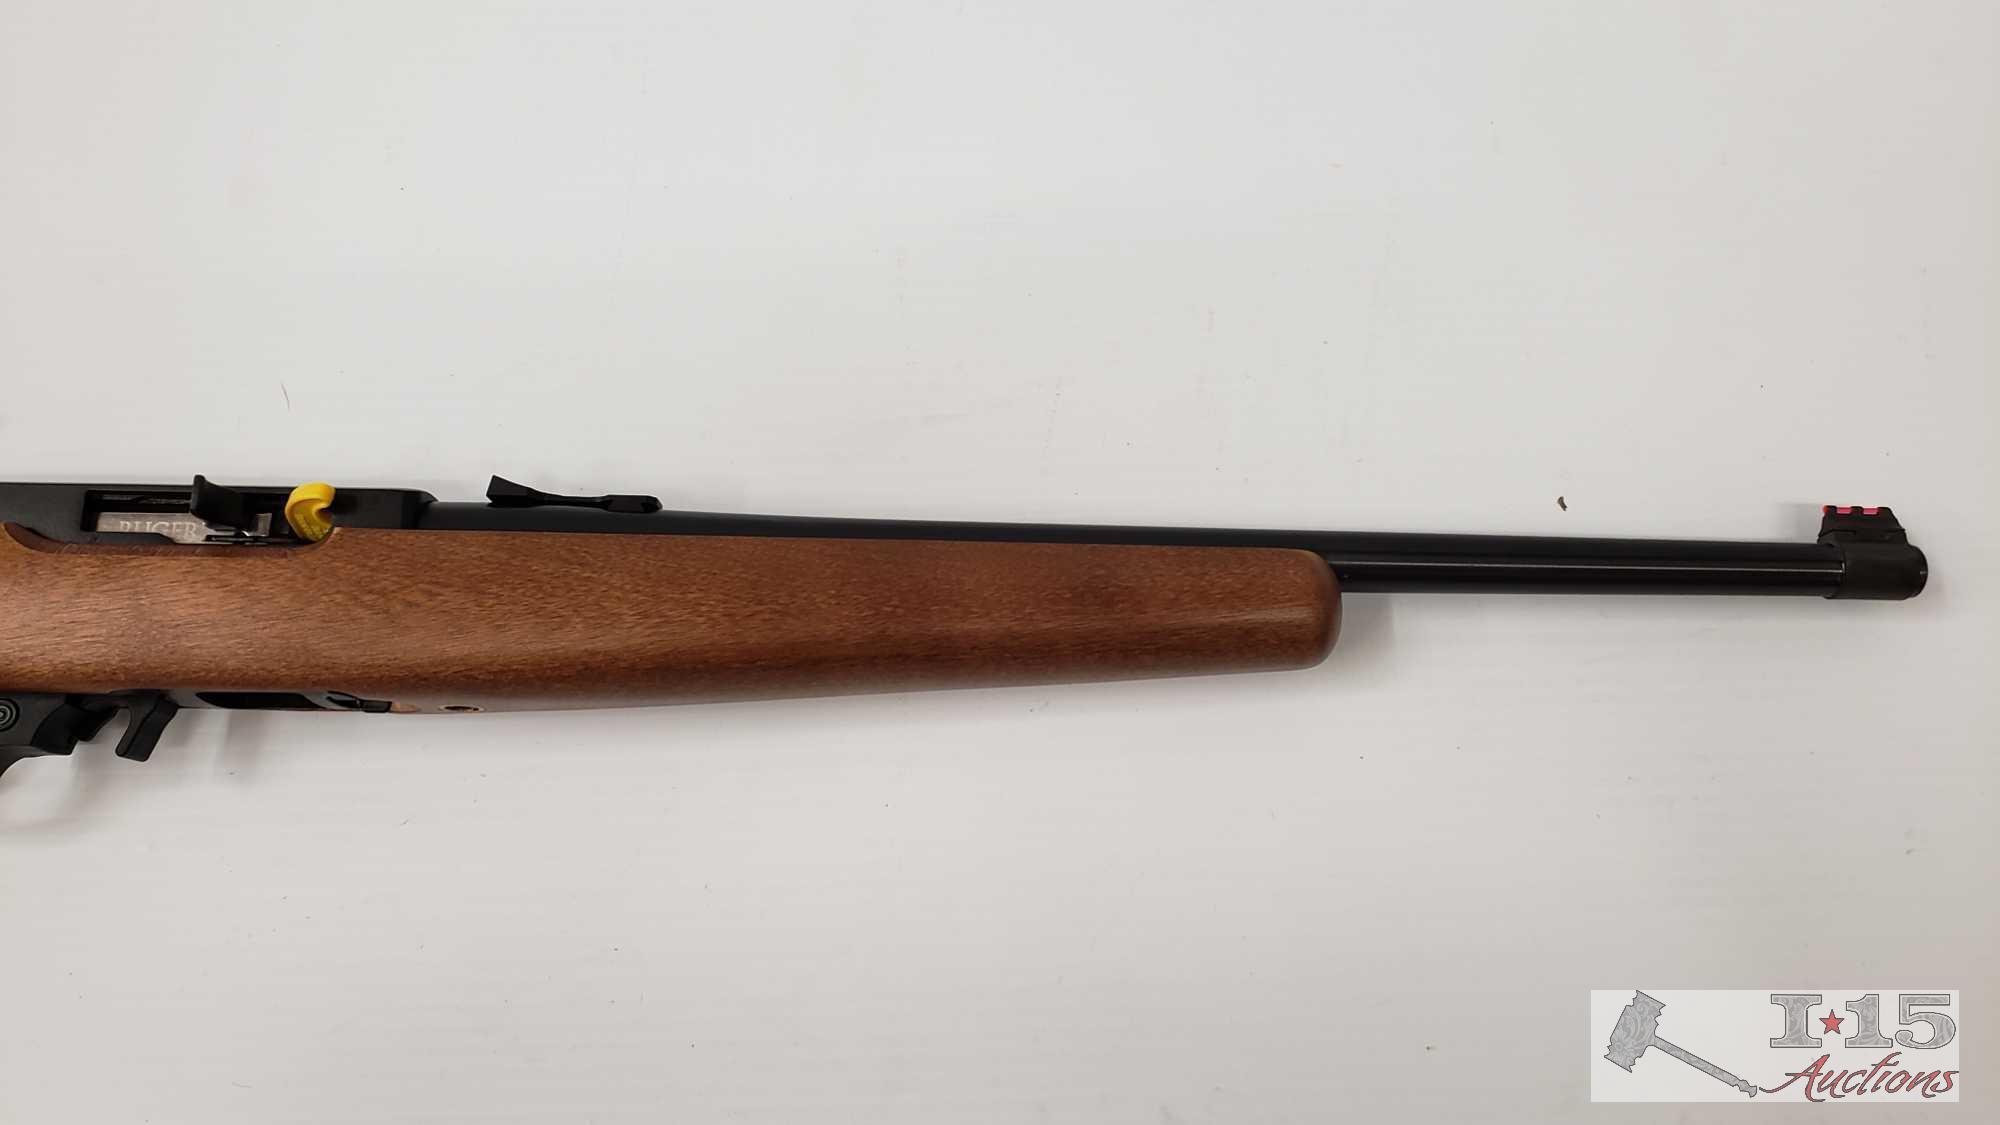 New, Ruger 10/22 .22lr Rifle